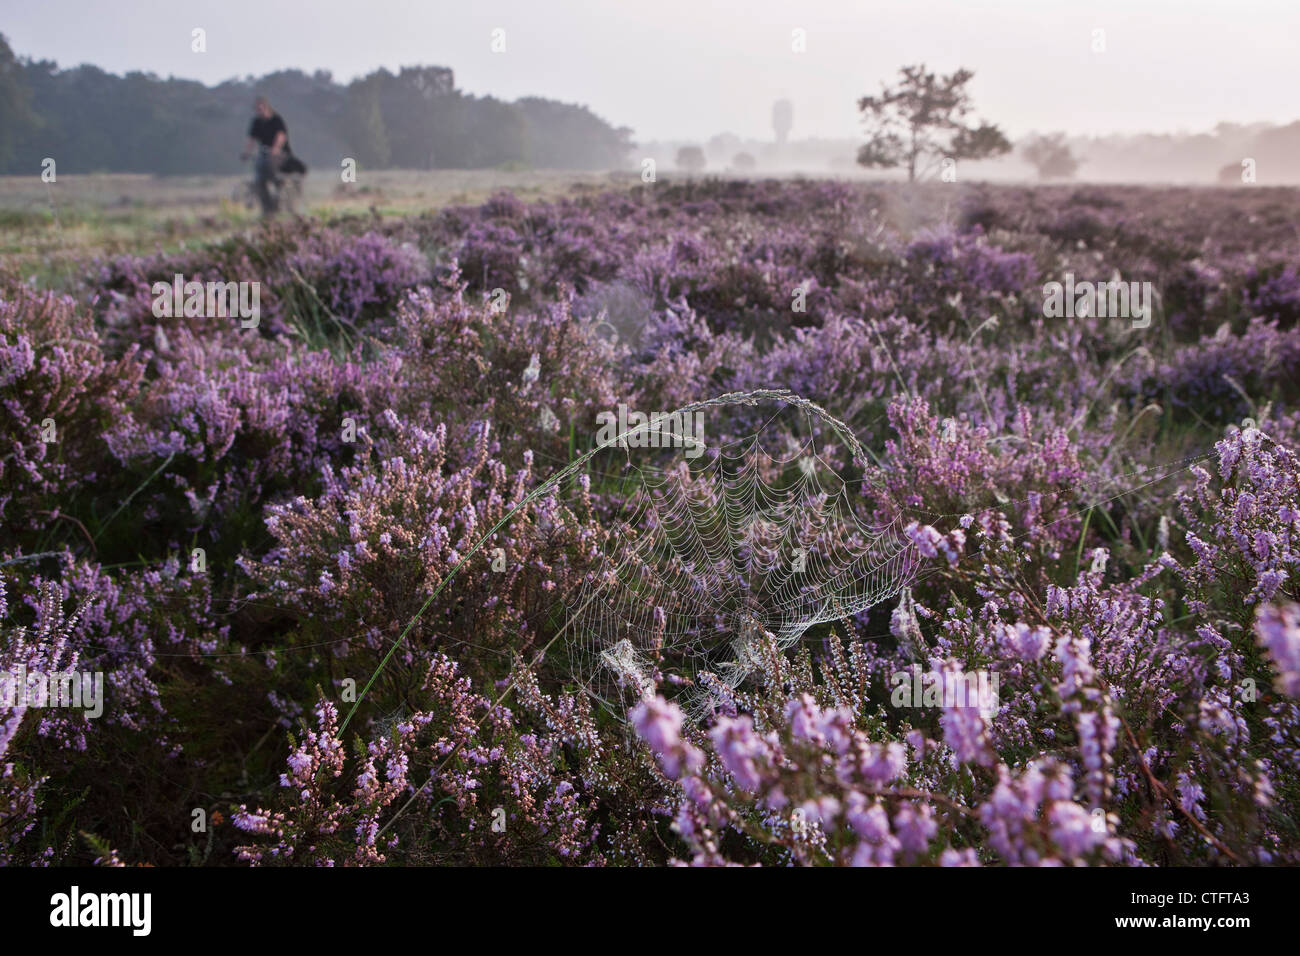 The Netherlands, Bussum, Early morning, flowering heath. Spider web. Stock Photo